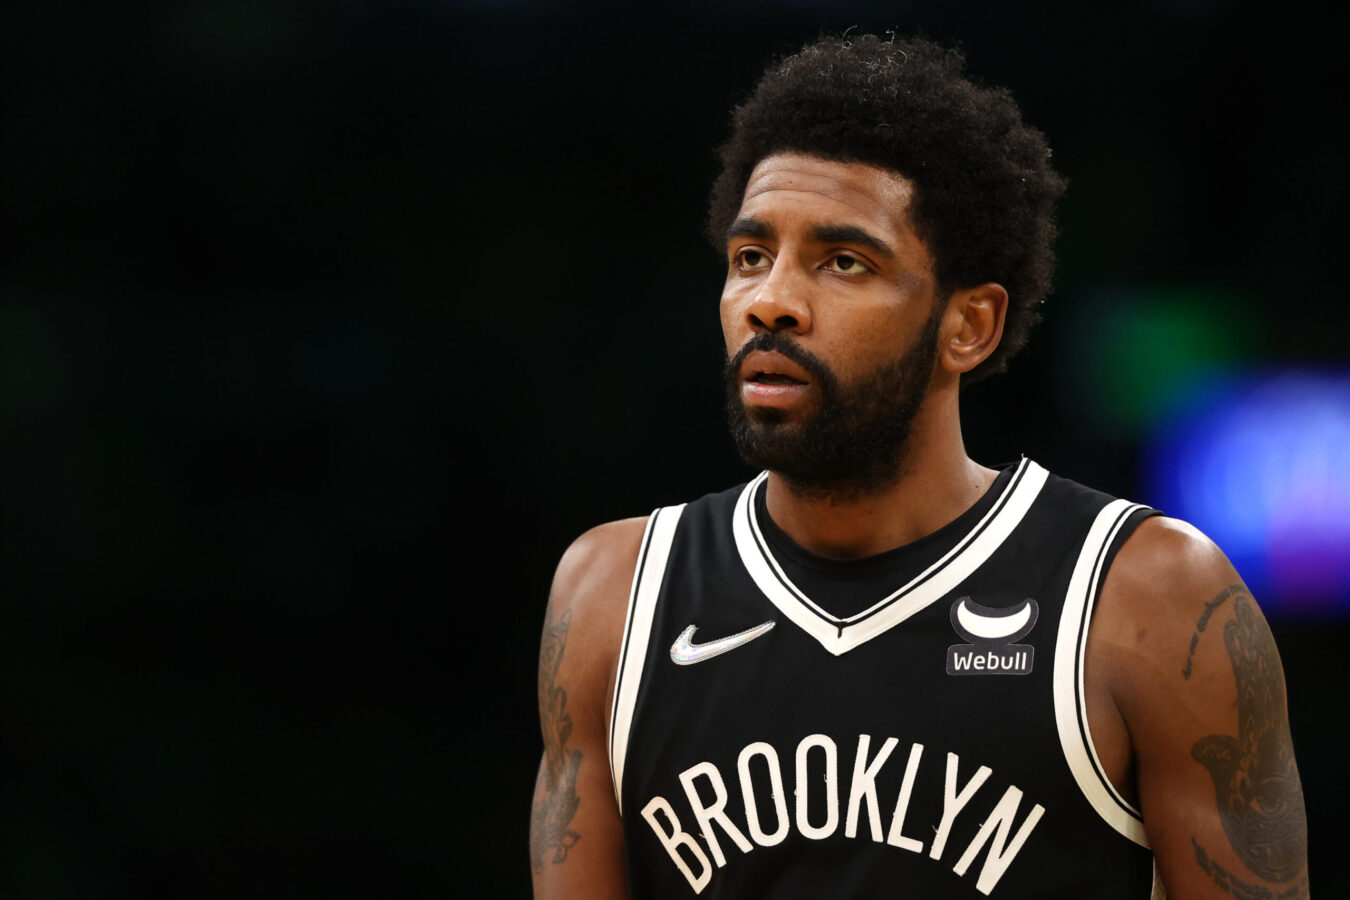 BOSTON, MASSACHUSETTS - APRIL 20: Kyrie Irving #11 of the Brooklyn Nets looks on during the second quarter of Game Two of the Eastern Conference First Round NBA Playoffs against the Boston Celtics at TD Garden on April 20, 2022 in Boston, Massachusetts. (Photo by Maddie Meyer/Getty Images)